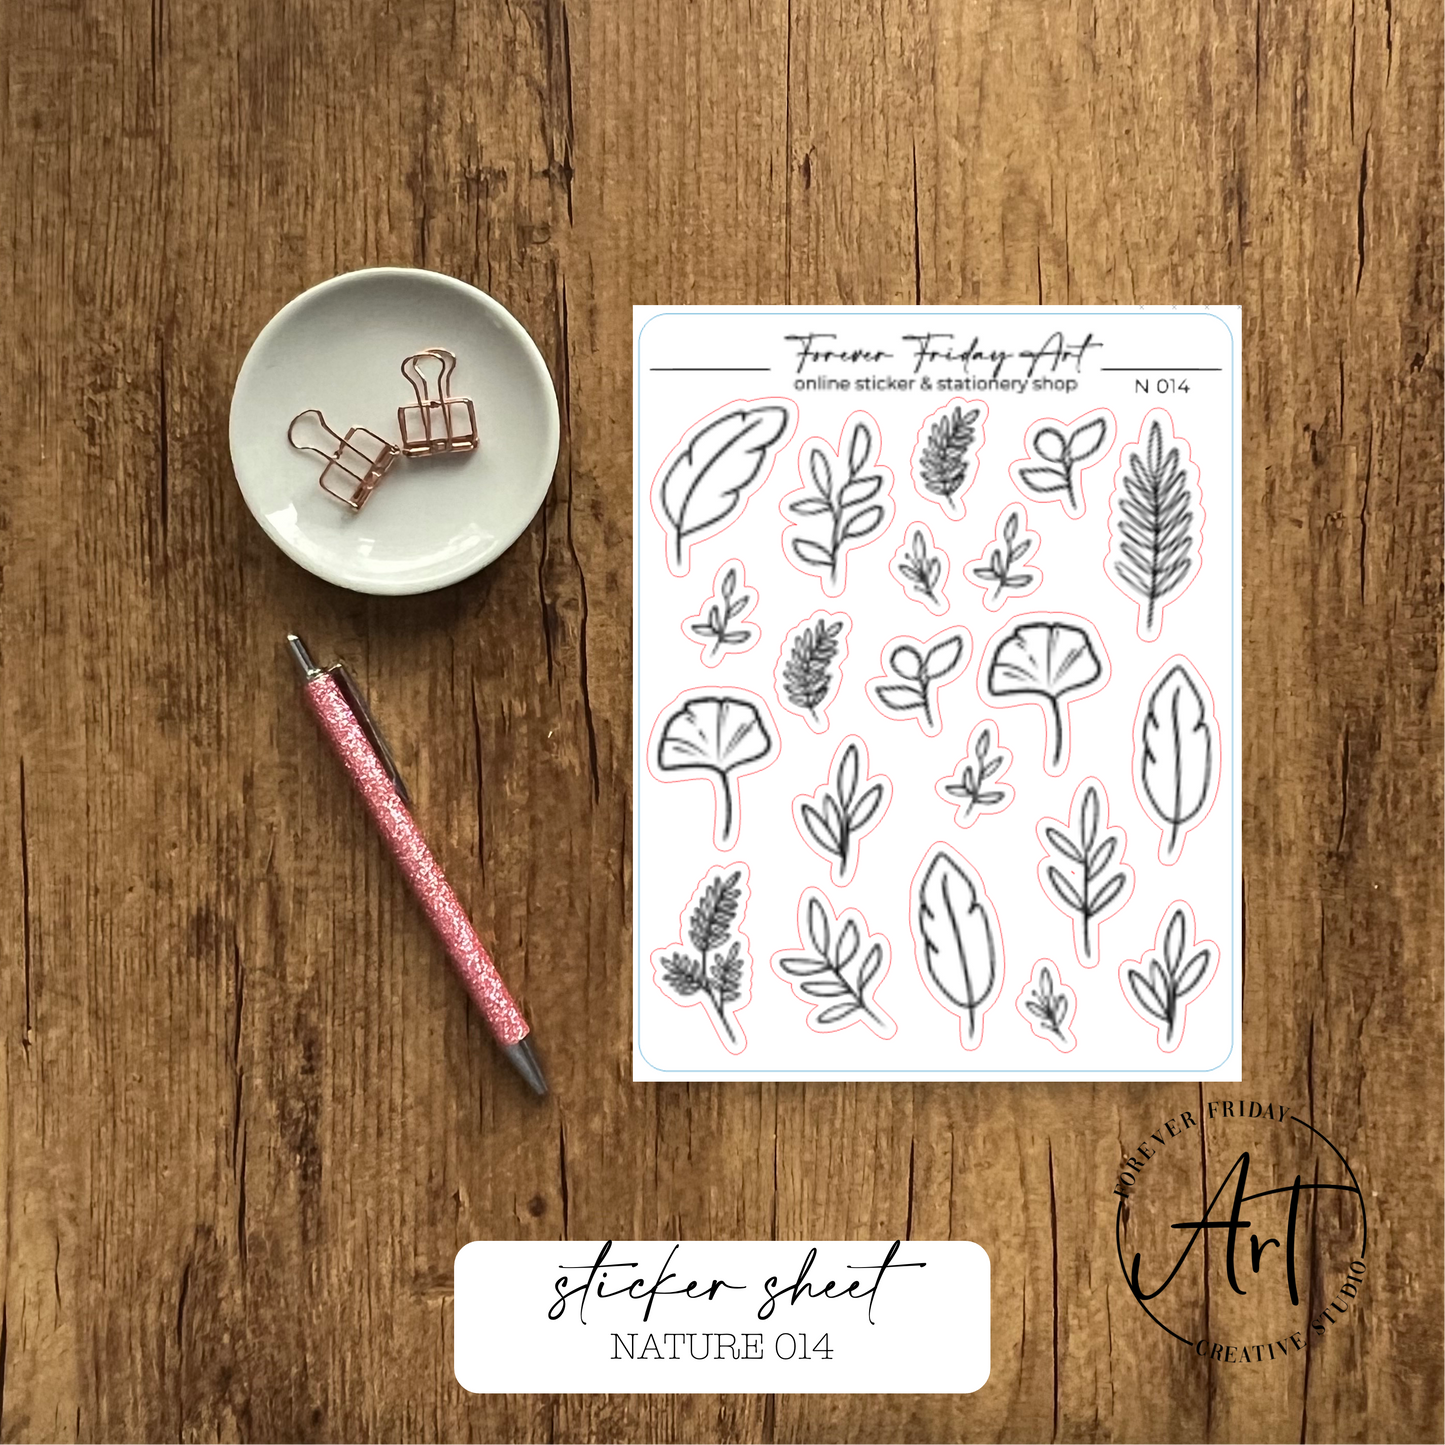 Nature Sticker Sheets N013-N017